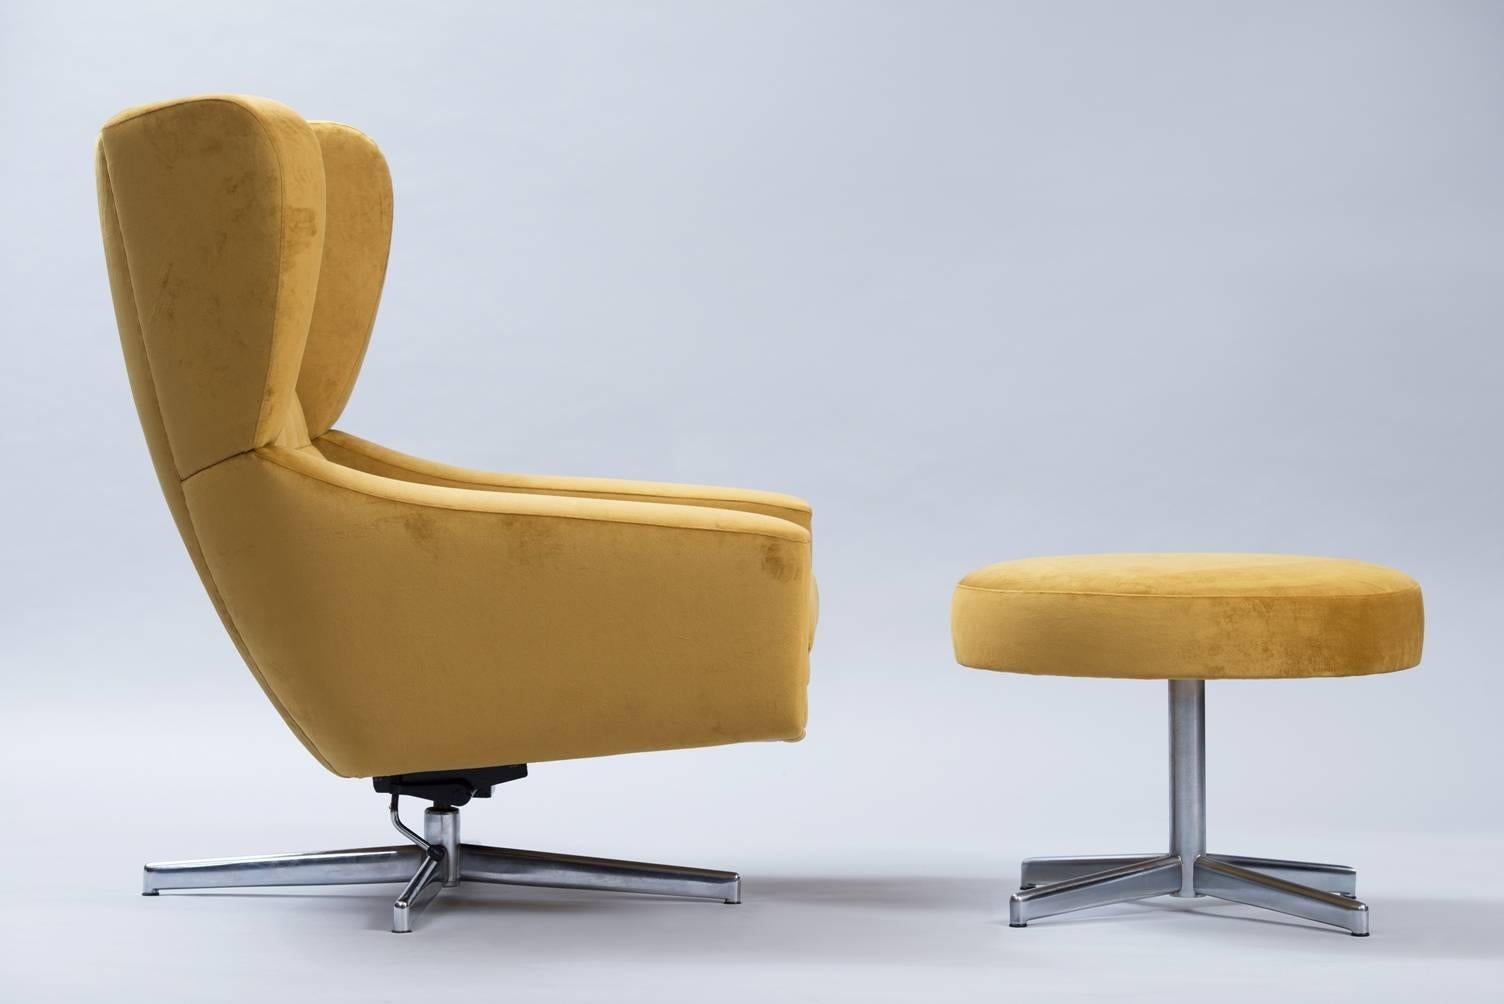 Swivel armchair with ottoman, re-upholstered in yellow velvet.
Dimensions:
Chair: H 38.18 in (back) – 97 cm, W 36,61 in – 93 cm, D 35.82 in – 91 cm.
Ottoman: D 22.04 in – 56 cm, H 16.14 in – 41 cm.